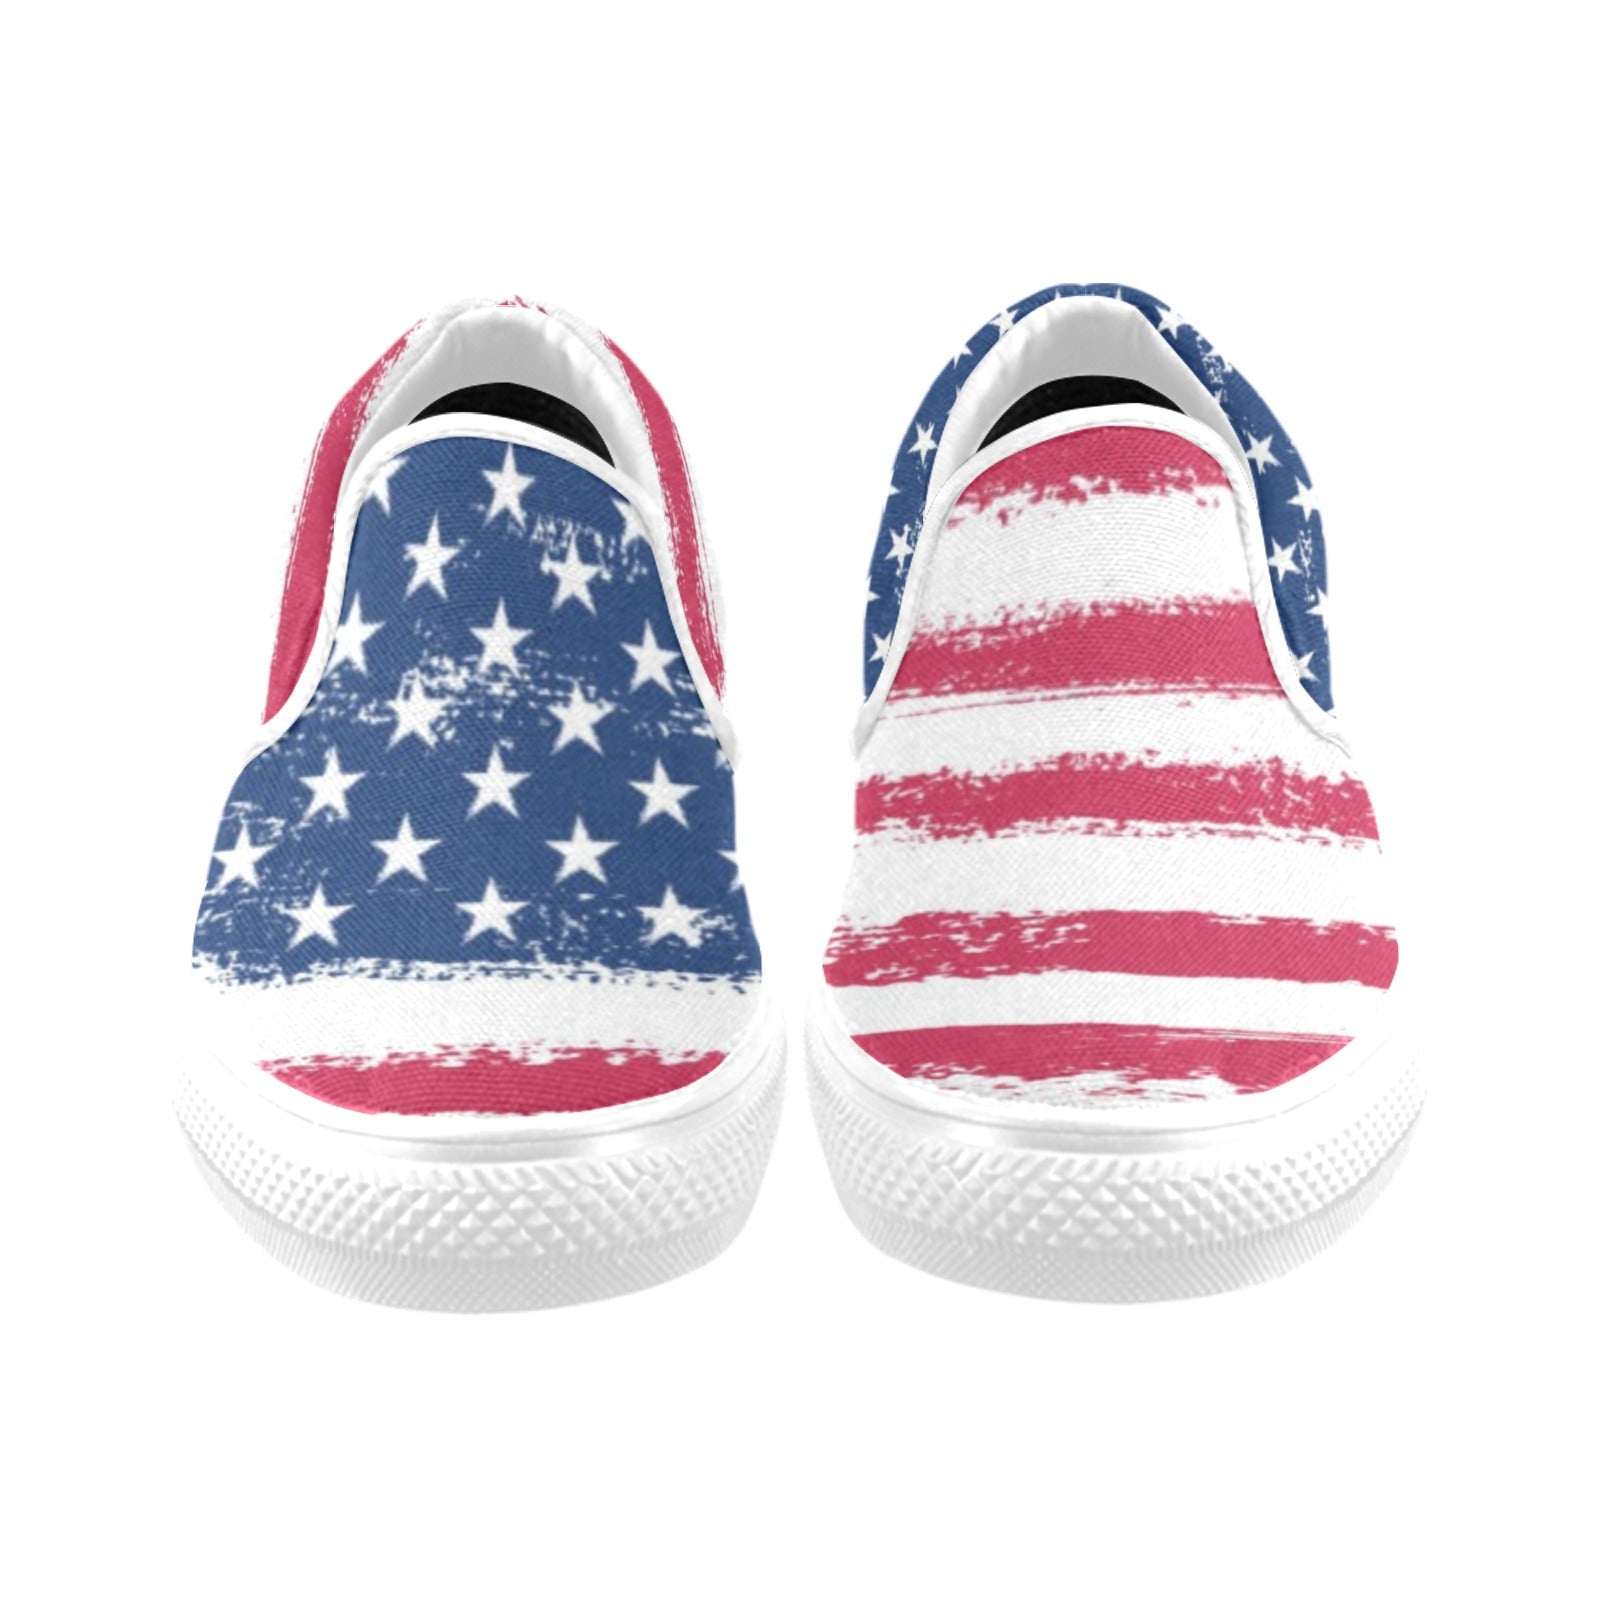 USA, USA Sneakers, Stars and Stripes Sneakers, Red White and Blue Sneakers, Sparkly Sneakers, American Flag Sneakers, 4th of July Sneakers